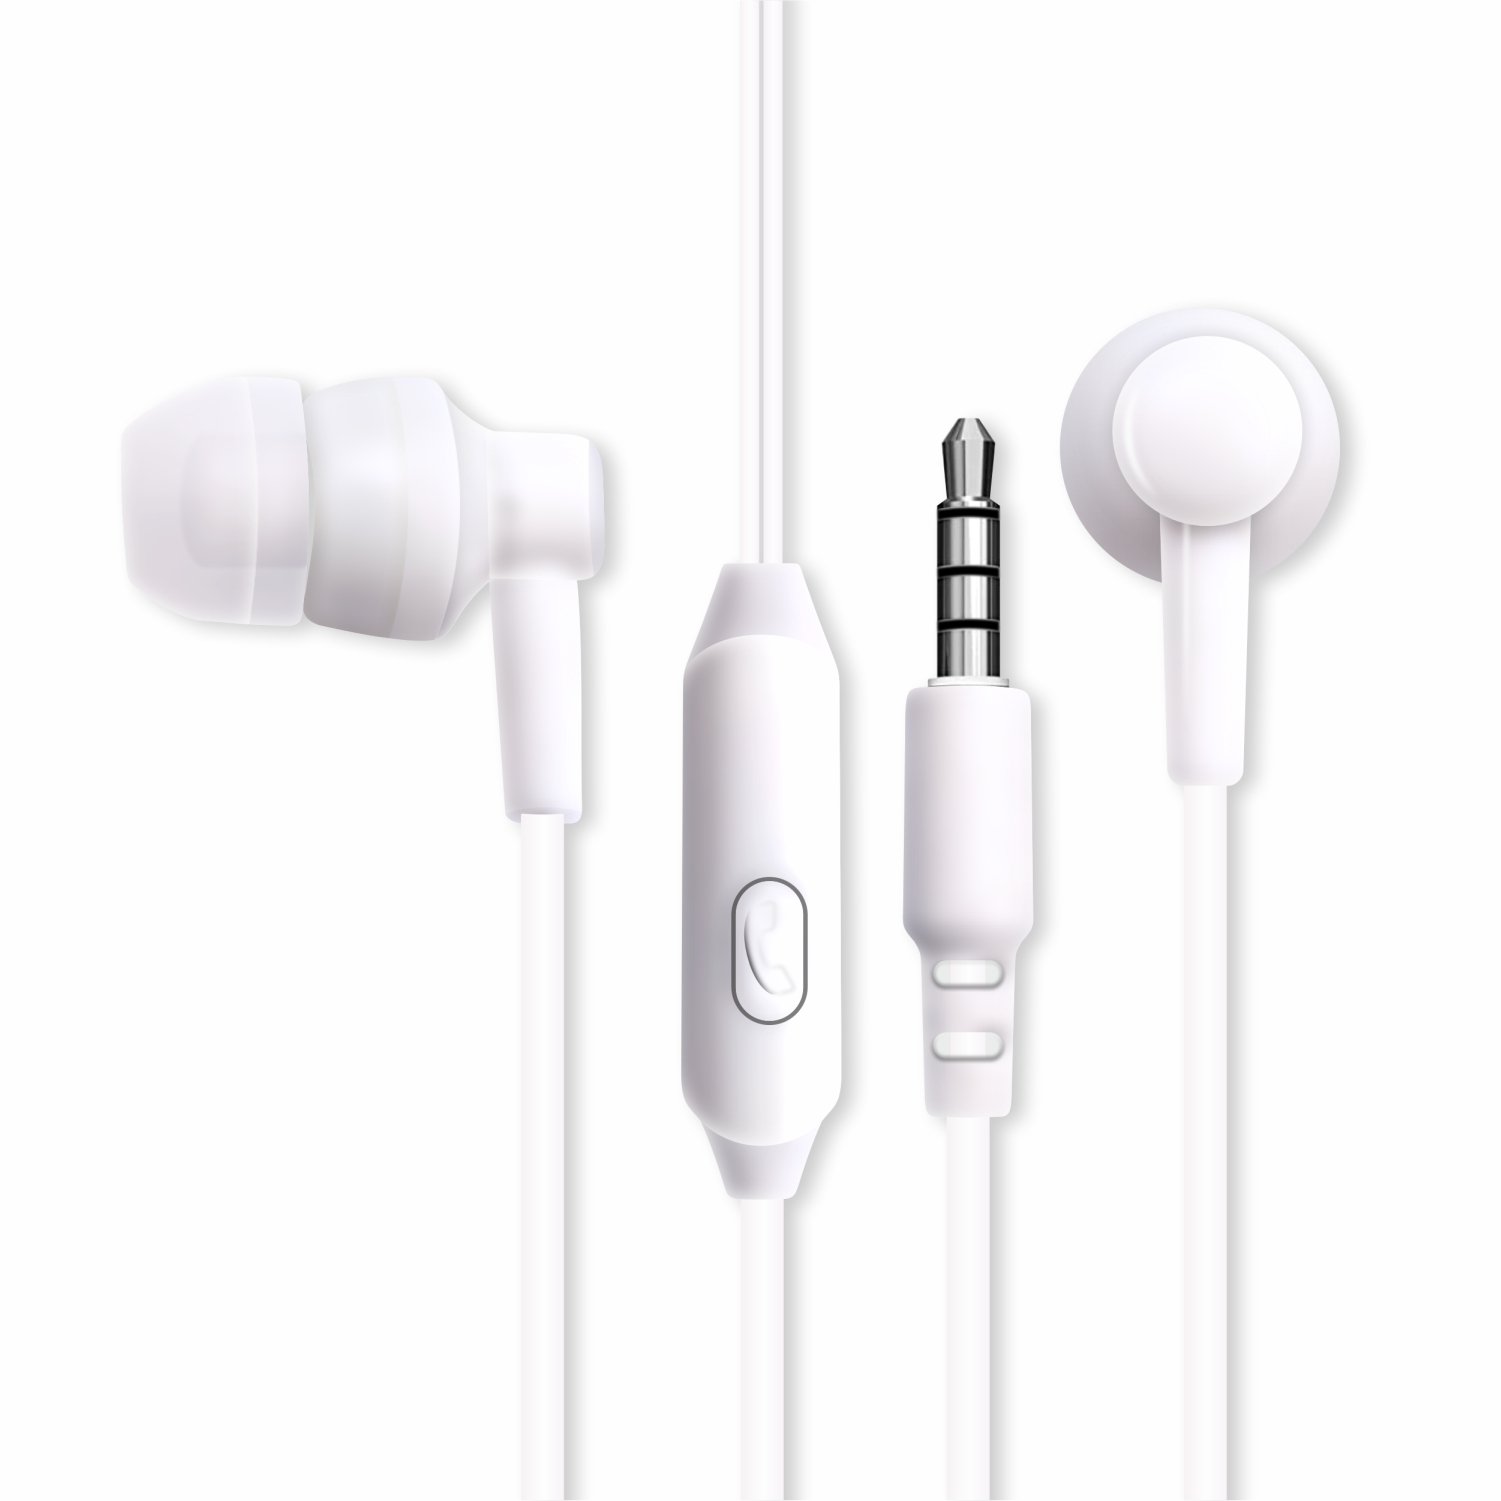 NG-104 Extra Bass Stereo Earphones